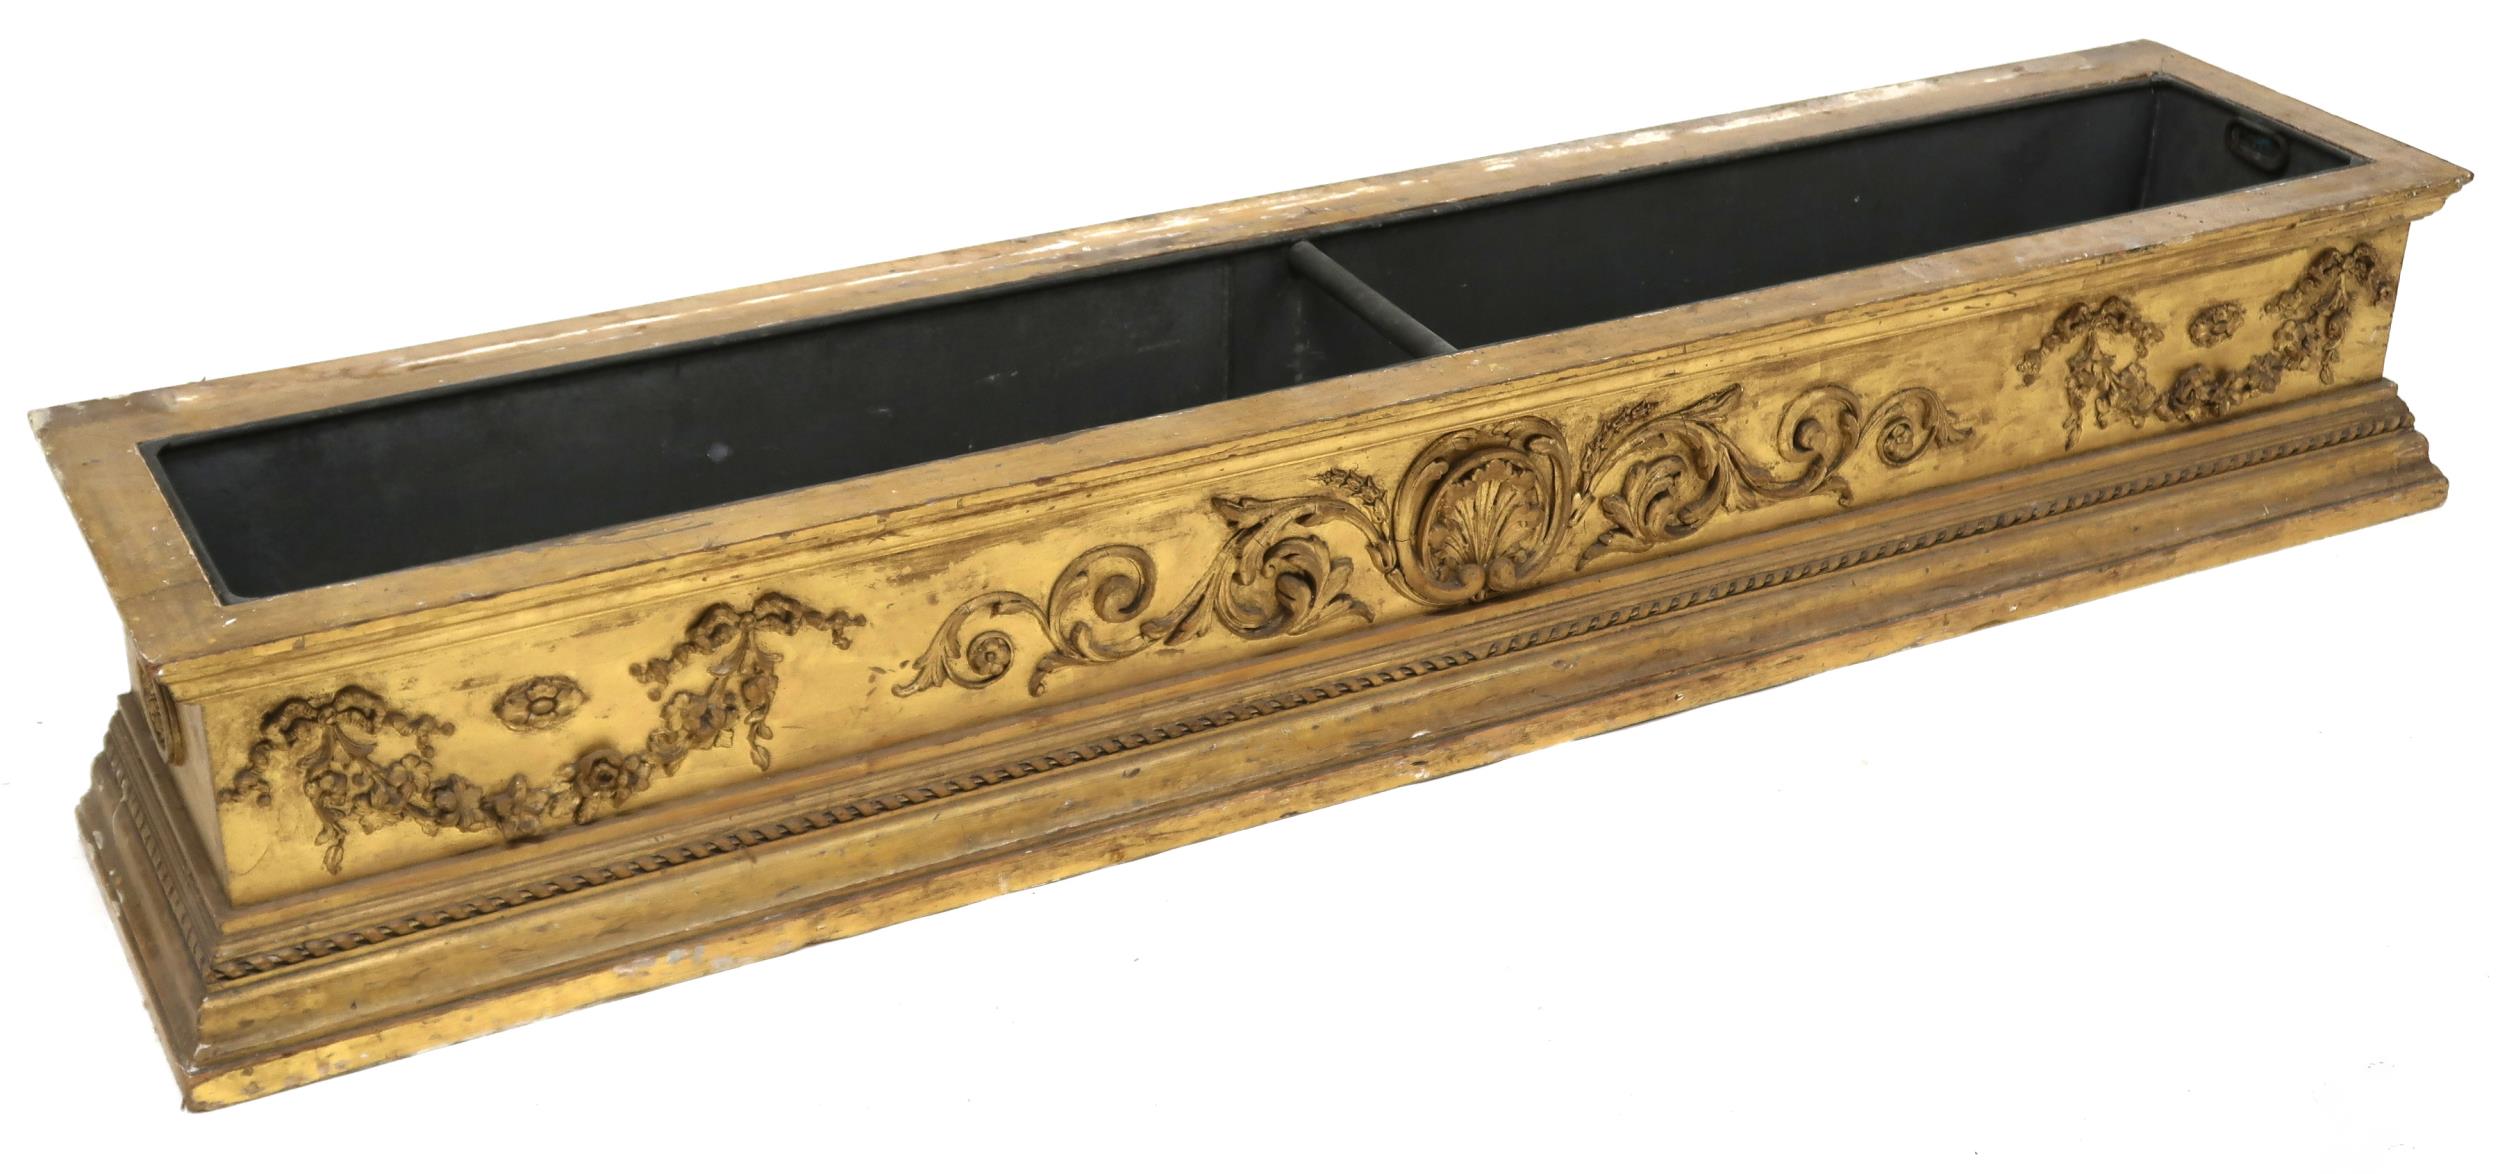 A LARGE 19TH CENTURY PINE GILT GESSO PLANT TROUGH  with moulded cornice over central scrolled - Image 8 of 11